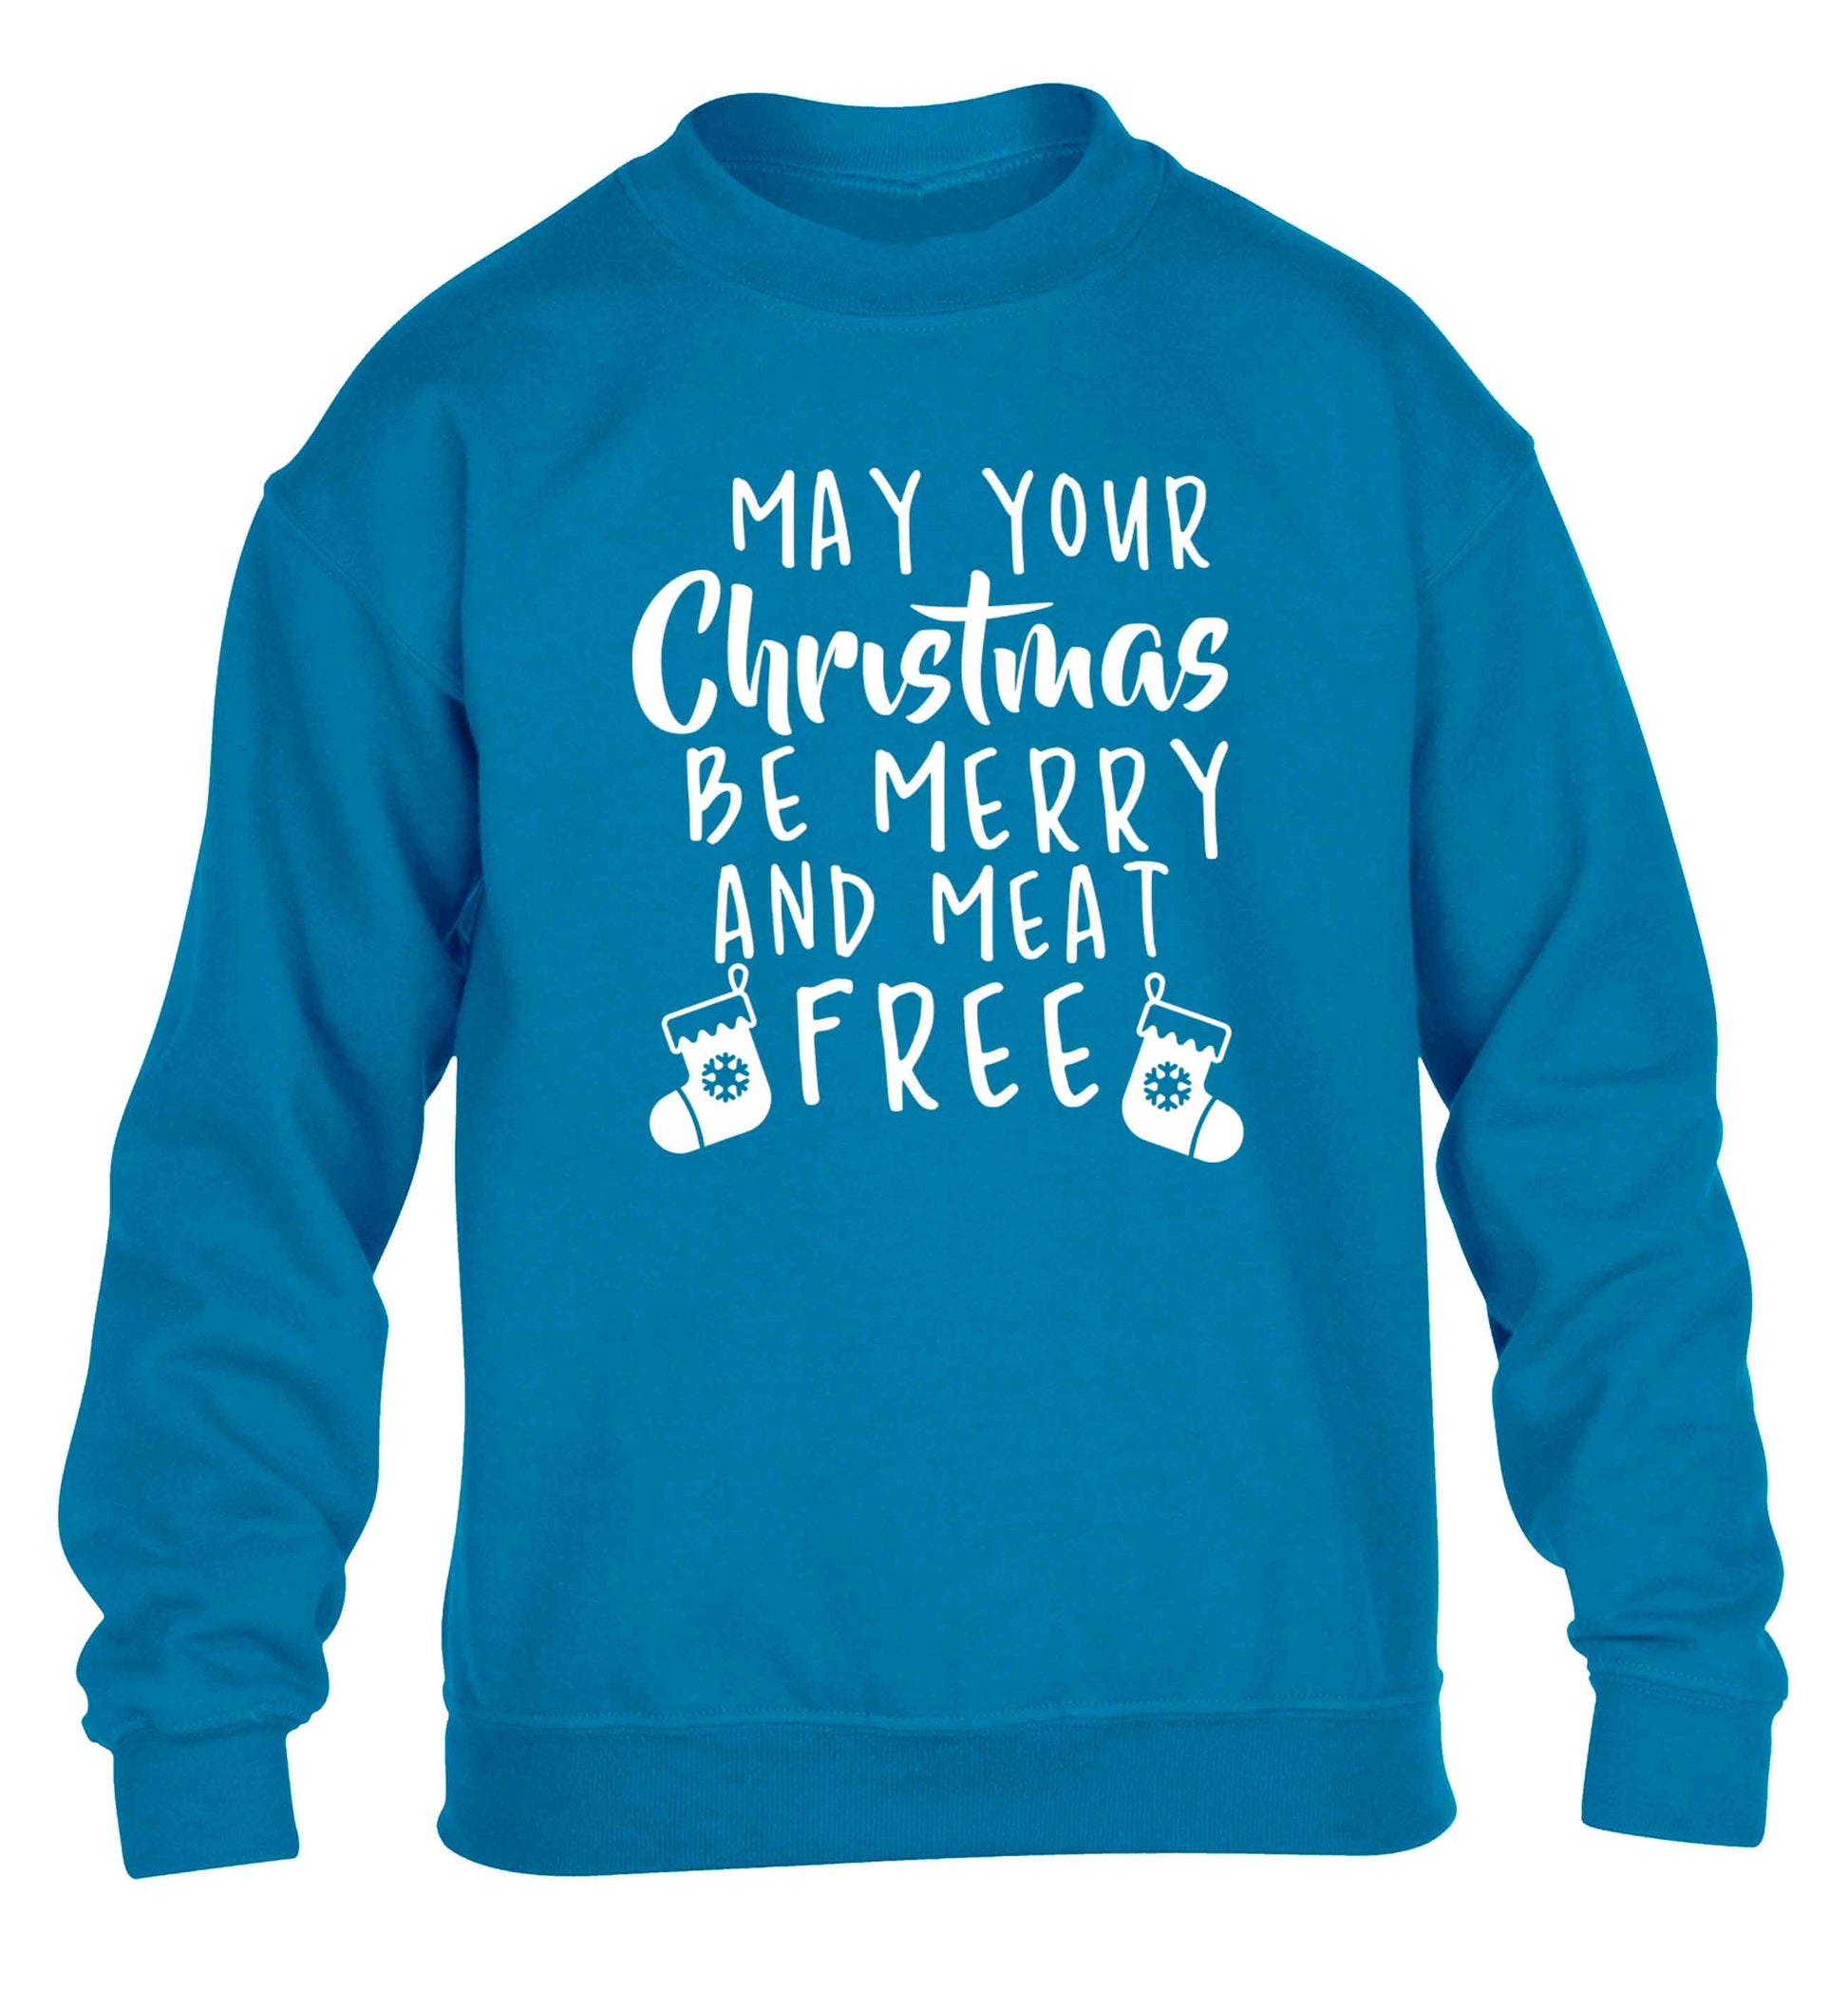 May your Christmas be merry and meat free children's blue sweater 12-13 Years